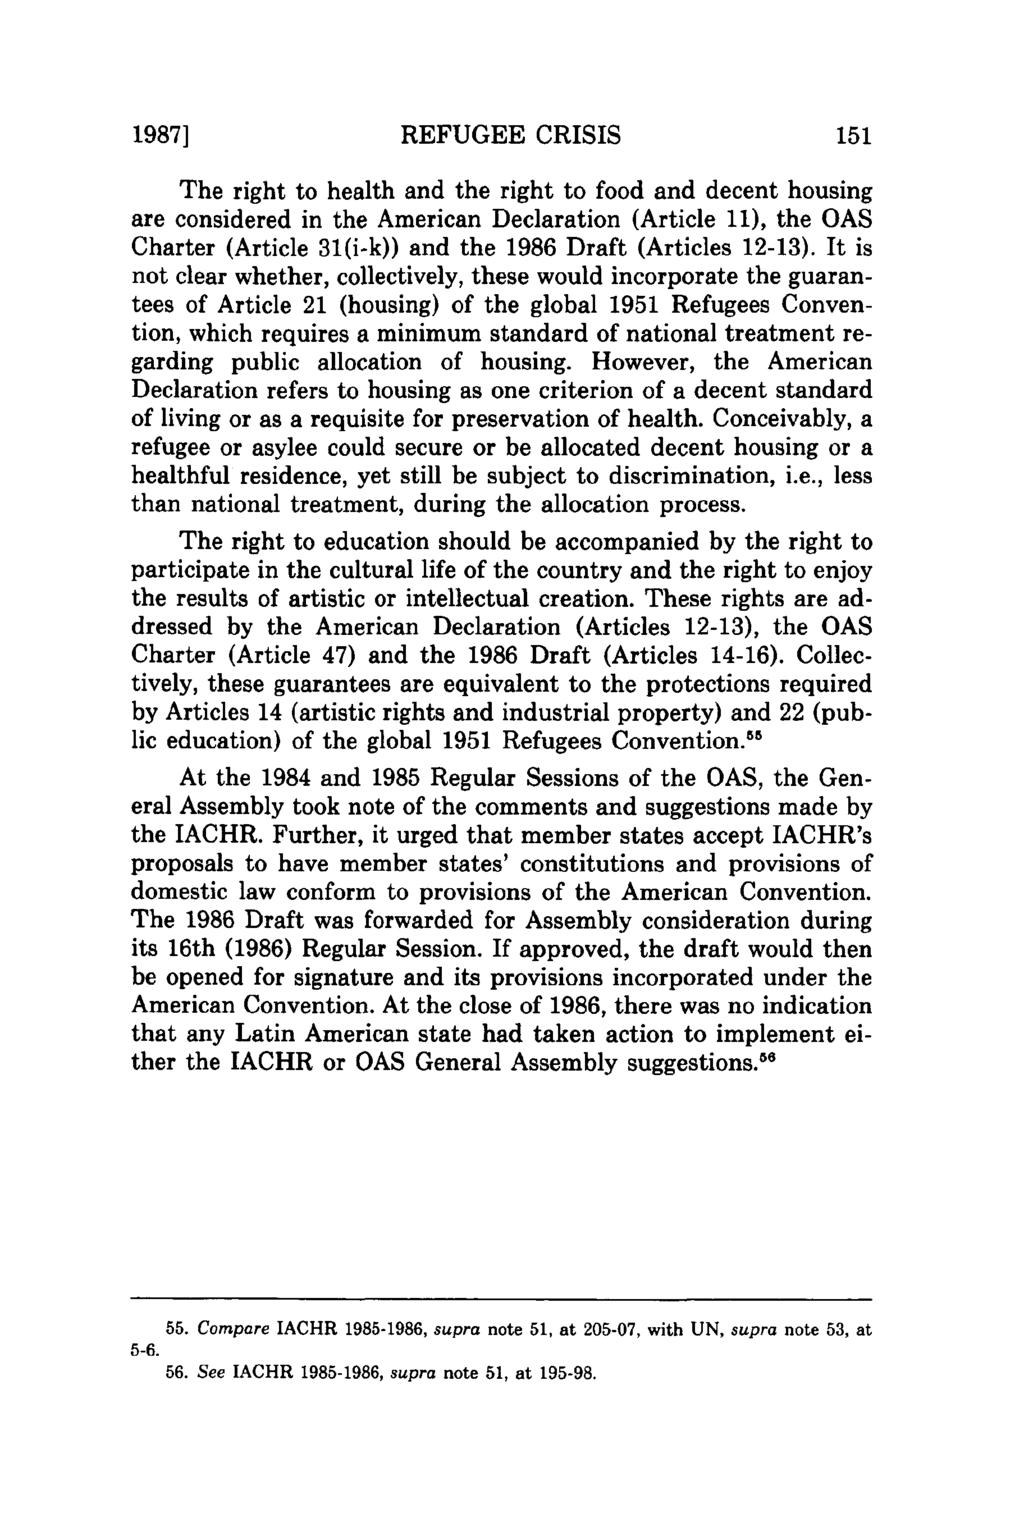 1987] REFUGEE CRISIS The right to health and the right to food and decent housing are considered in the American Declaration (Article 11), the OAS Charter (Article 31(i-k)) and the 1986 Draft